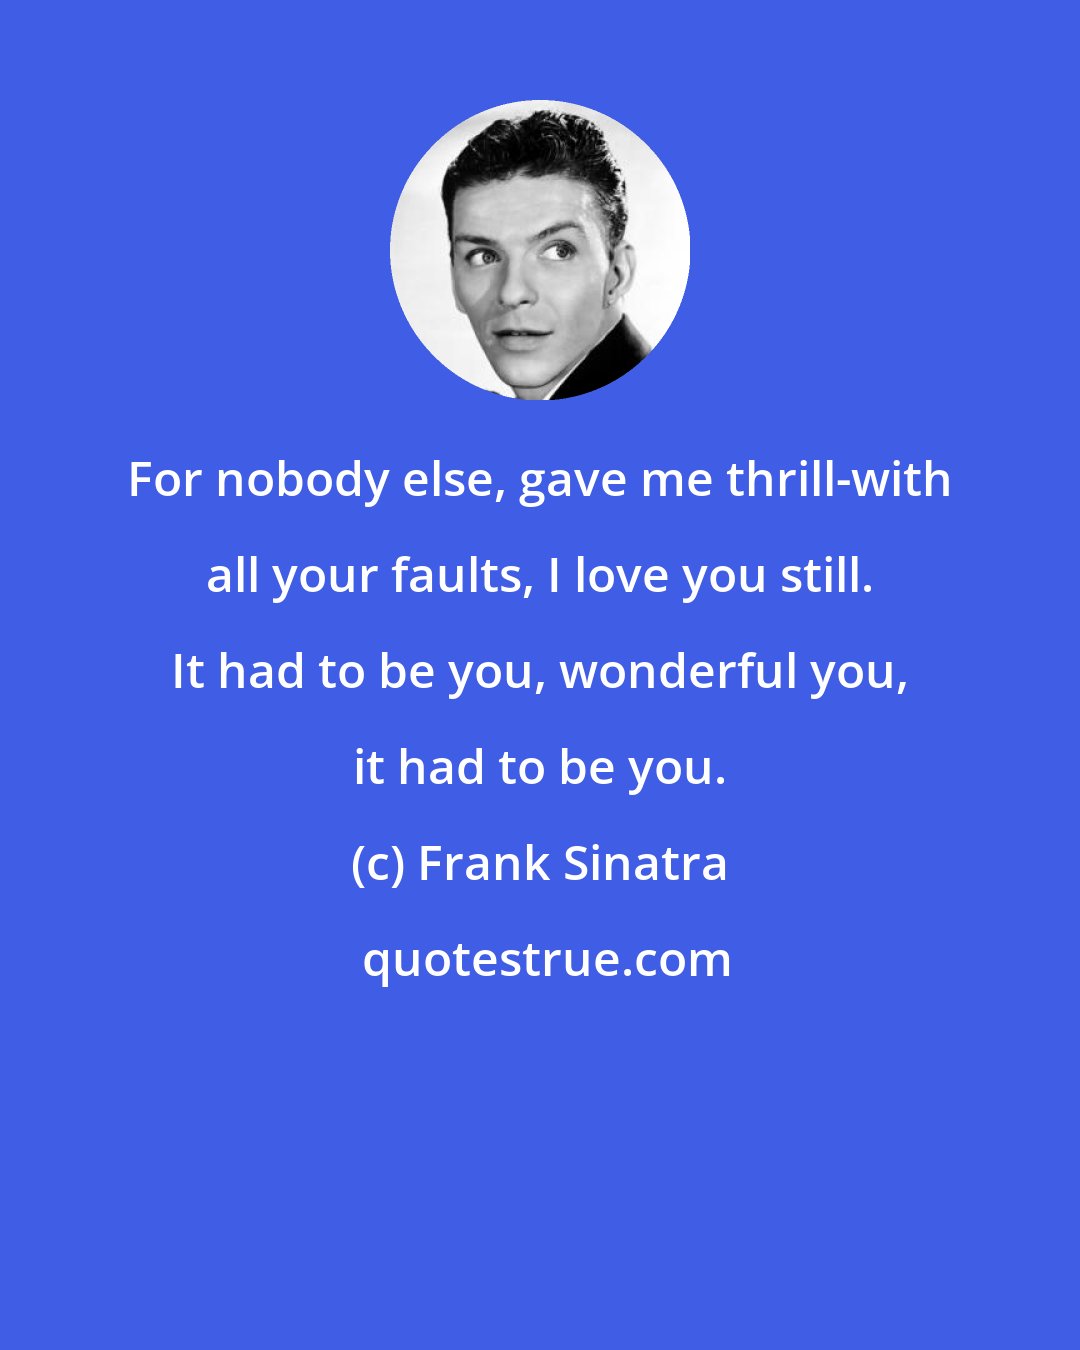 Frank Sinatra: For nobody else, gave me thrill-with all your faults, I love you still. It had to be you, wonderful you, it had to be you.